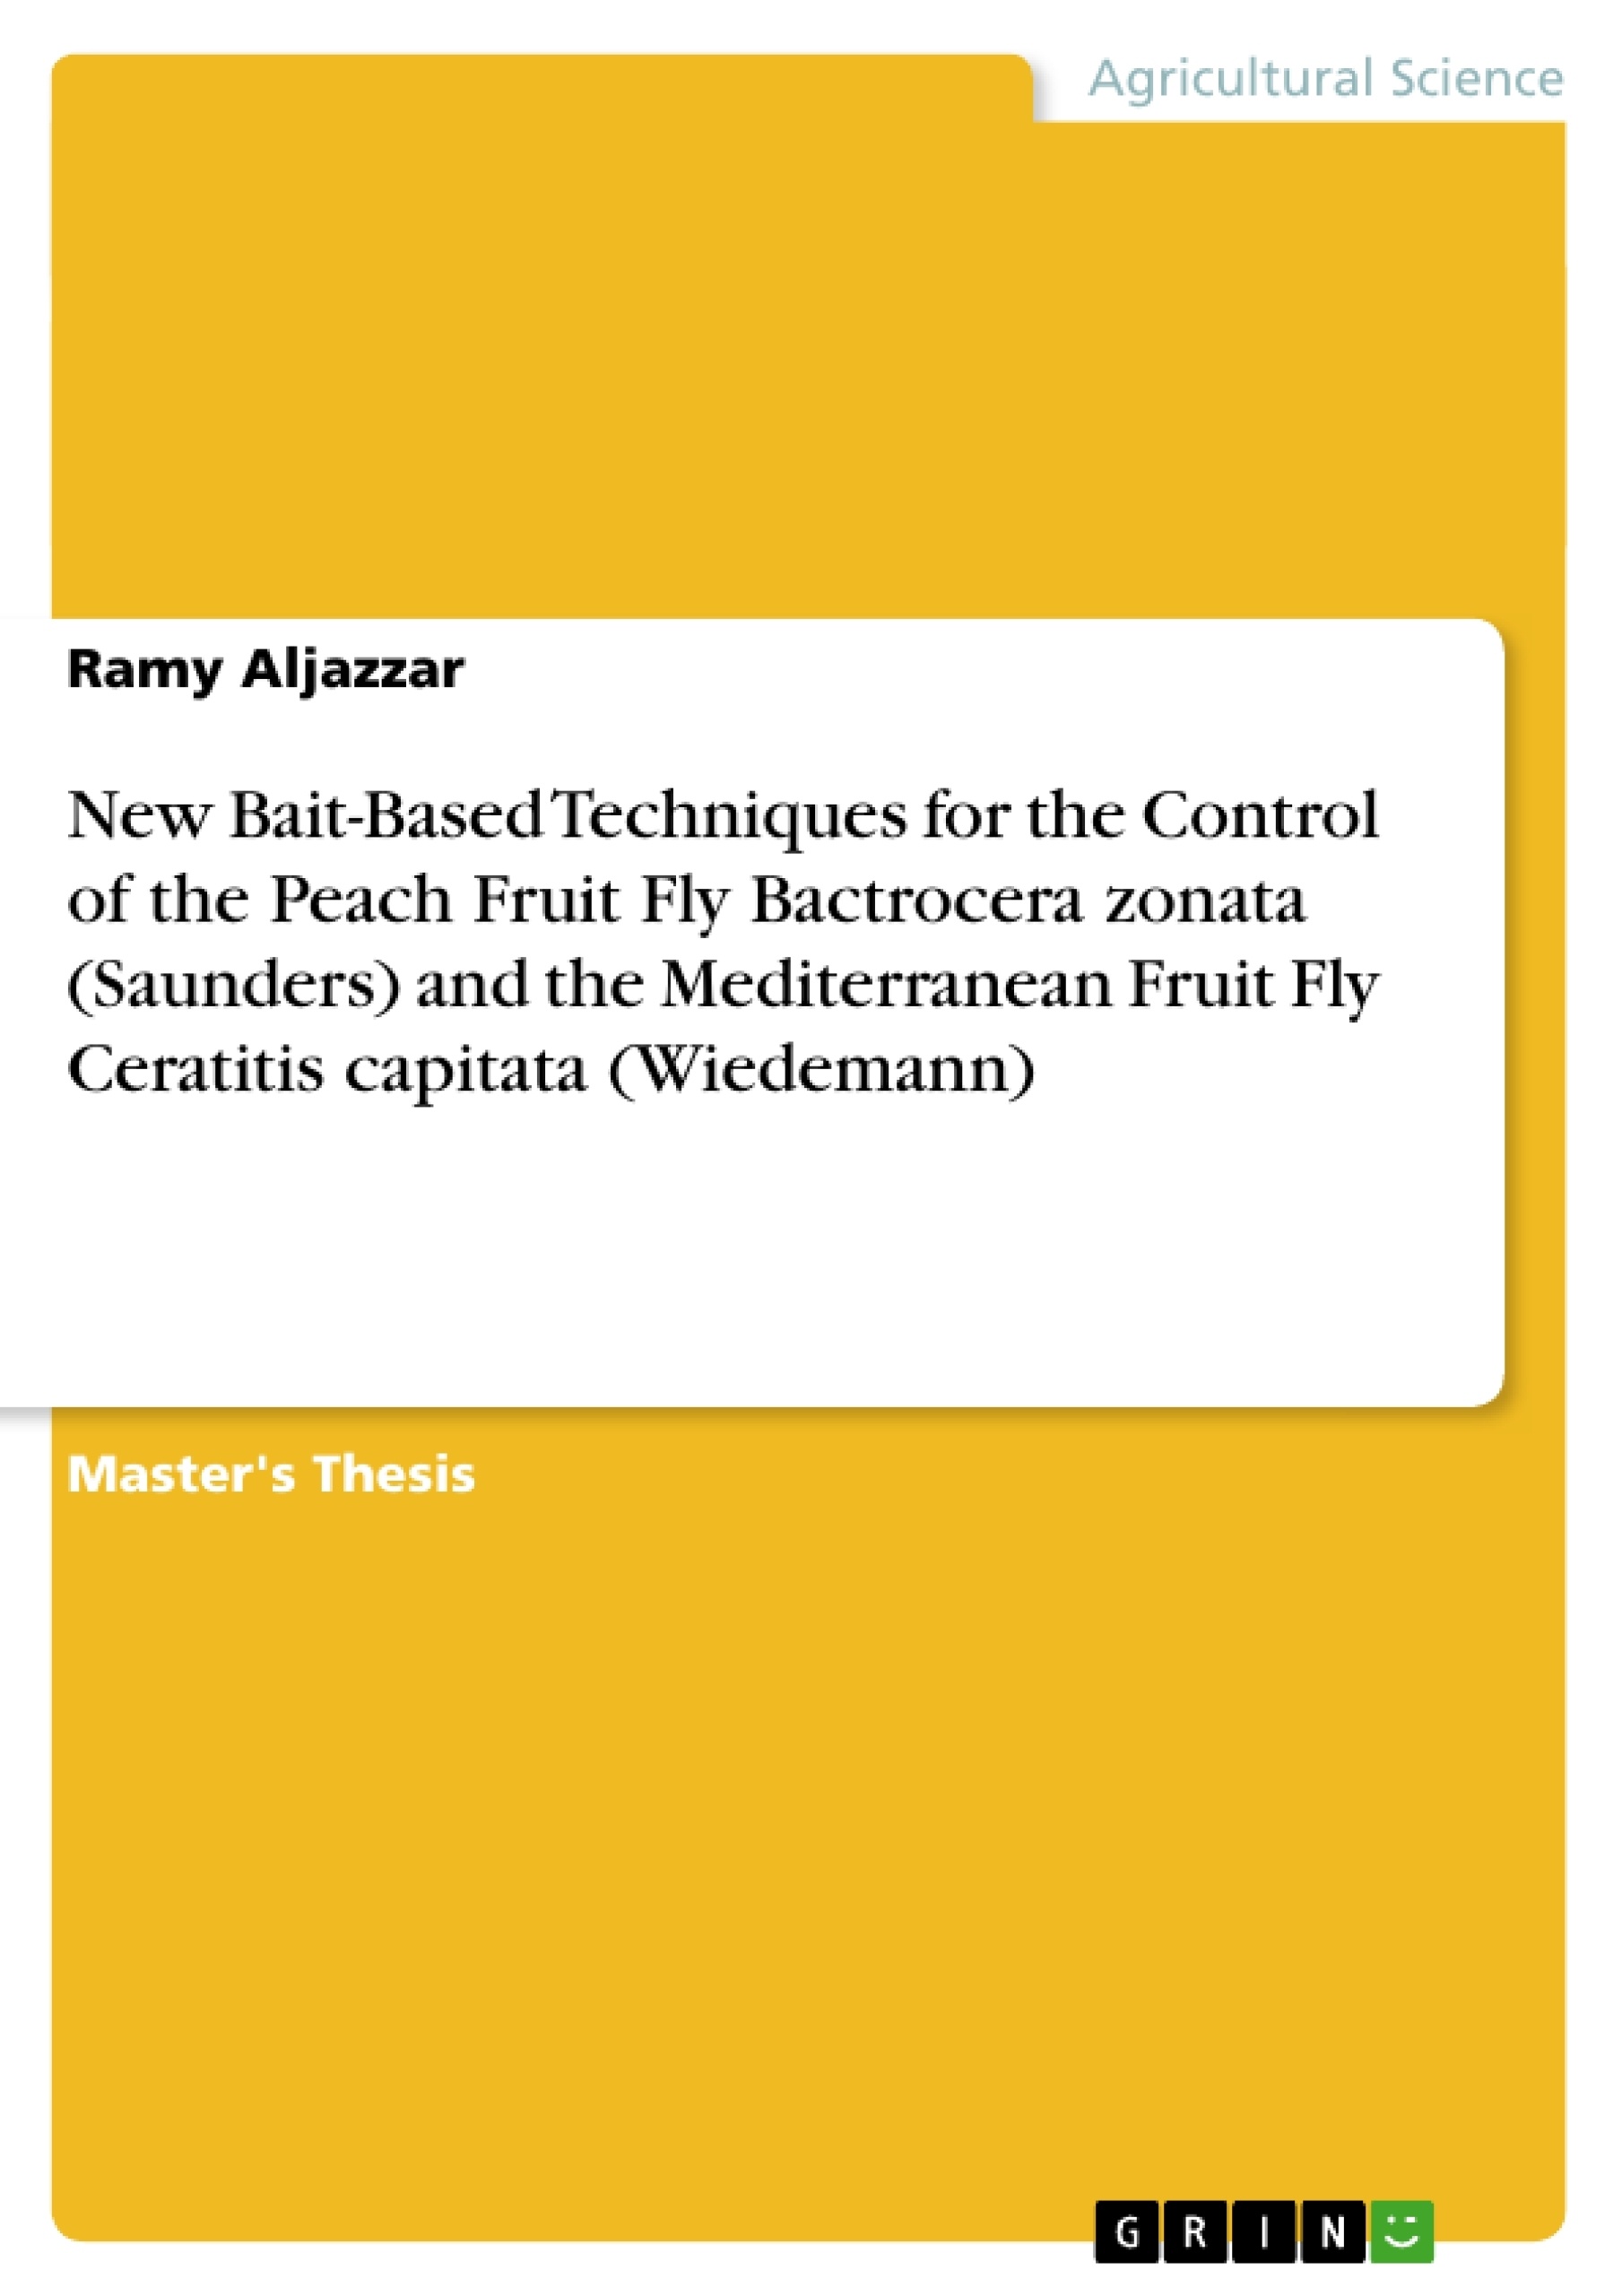 Titre: New Bait-Based Techniques for the Control of the Peach Fruit Fly Bactrocera zonata (Saunders) and the Mediterranean Fruit Fly Ceratitis capitata (Wiedemann)